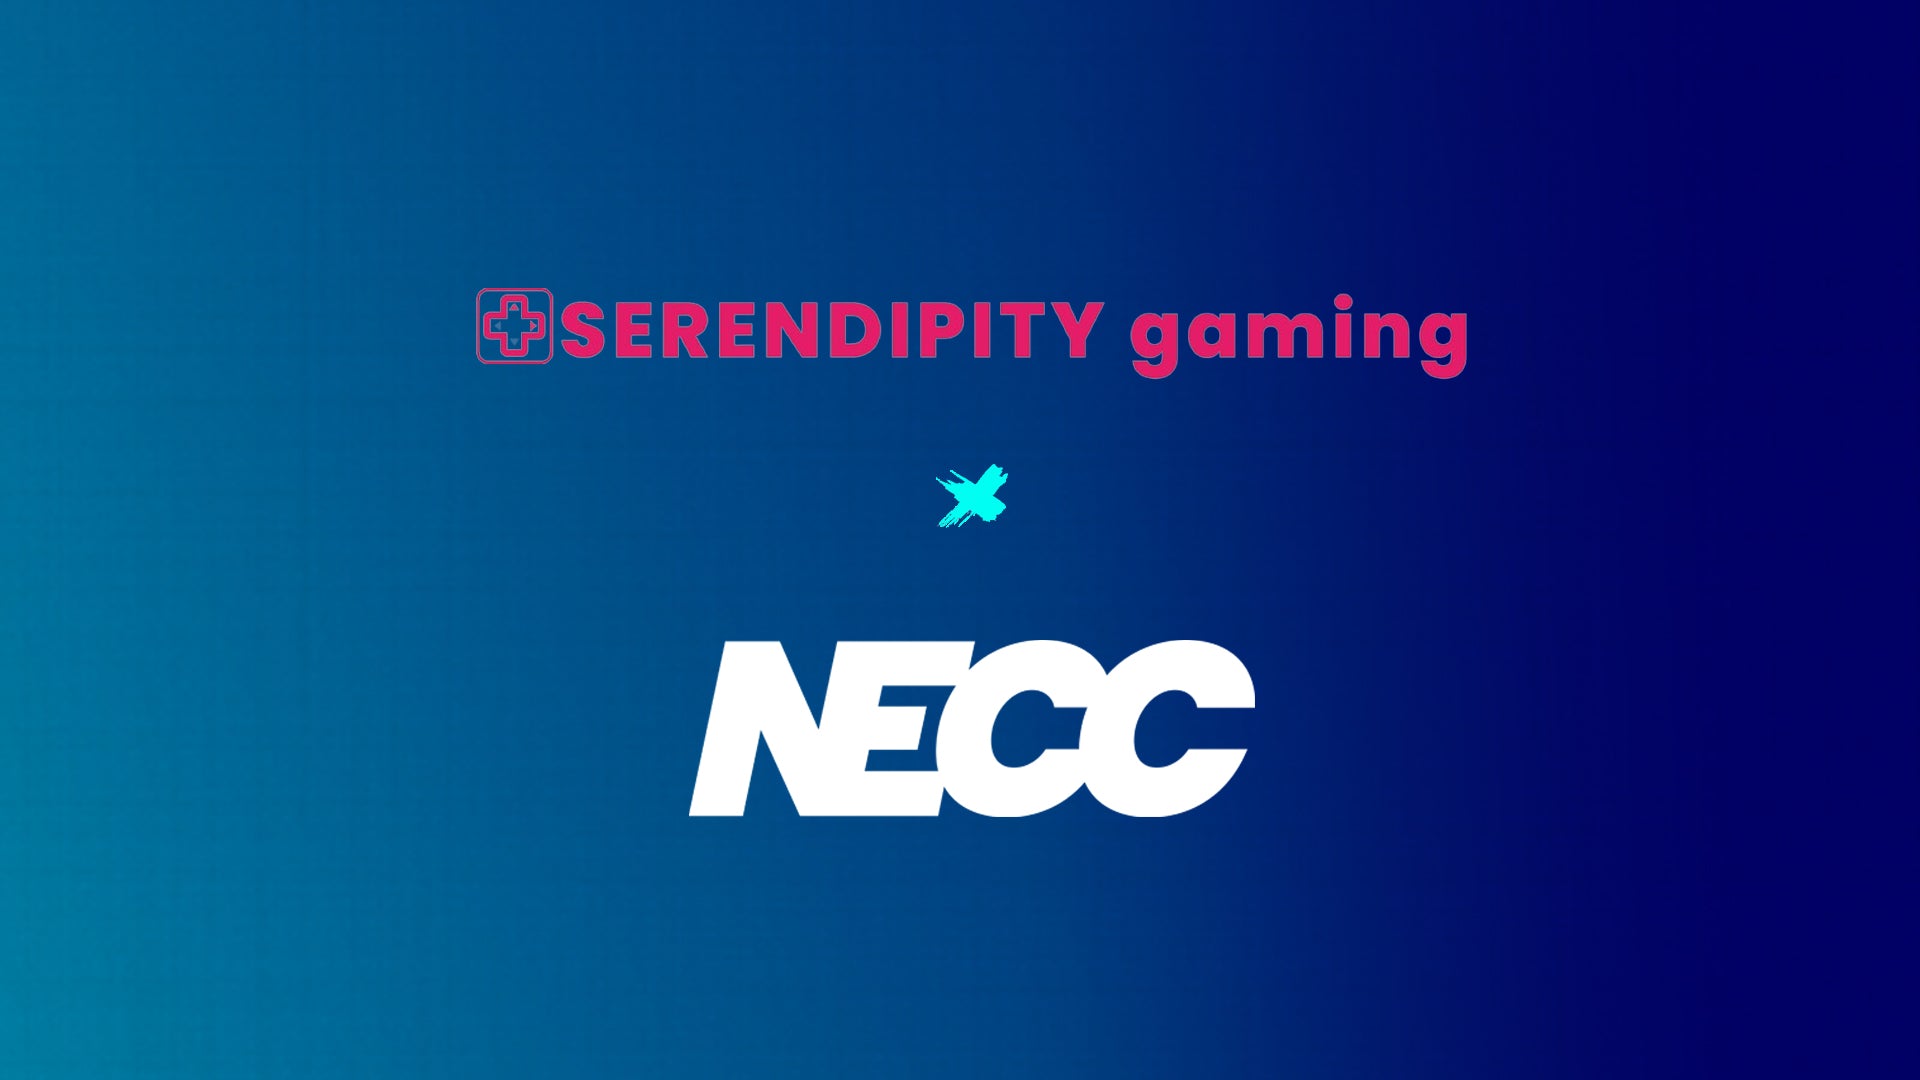 NECC Announces Partnership with SERENDIPITY Gaming